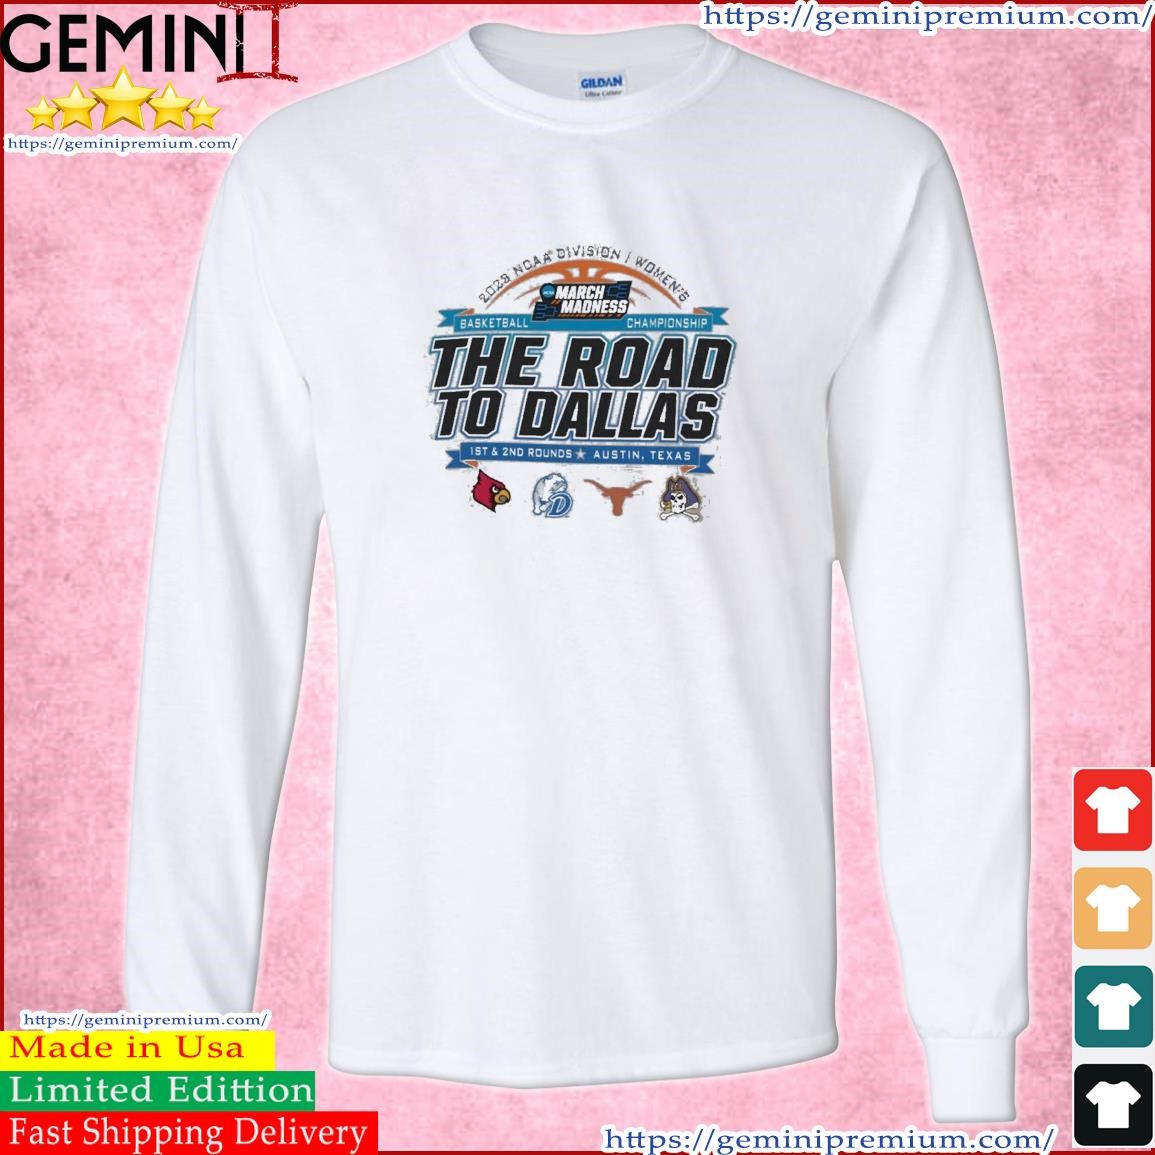 2023 NCAA Division I Women's Basketball The Road To Dallas March Madness 1st & 2nd Rounds Austin, TX Shirt Long Sleeve Tee.jpg